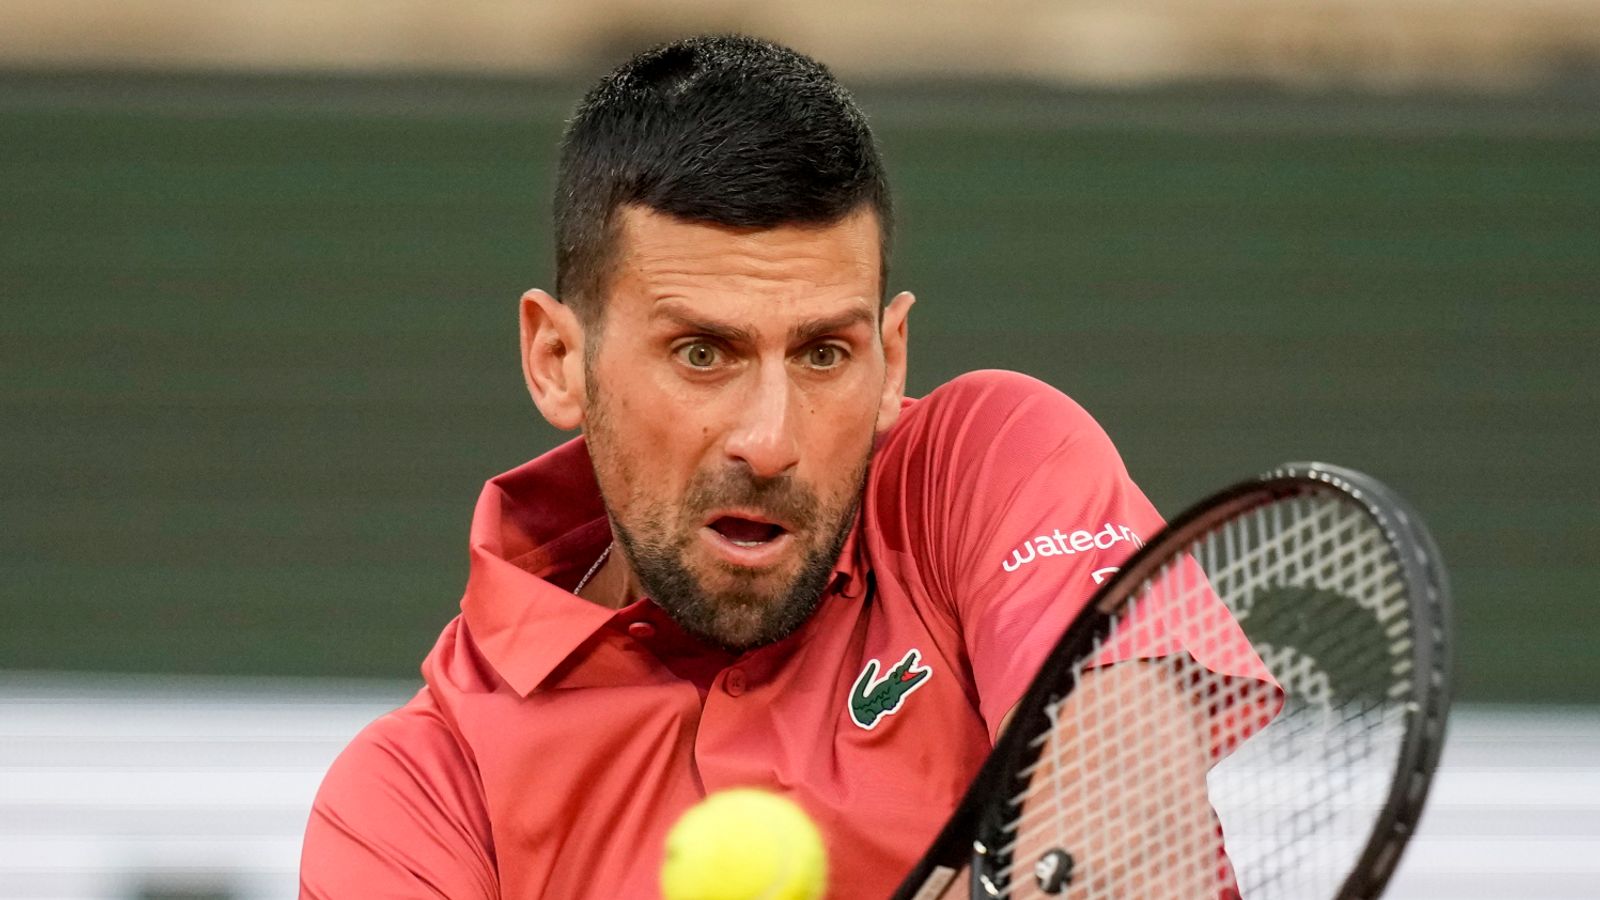 French Open: Order of play for day nine at Roland Garros with Novak Djokovic in action on Monday | Tennis News